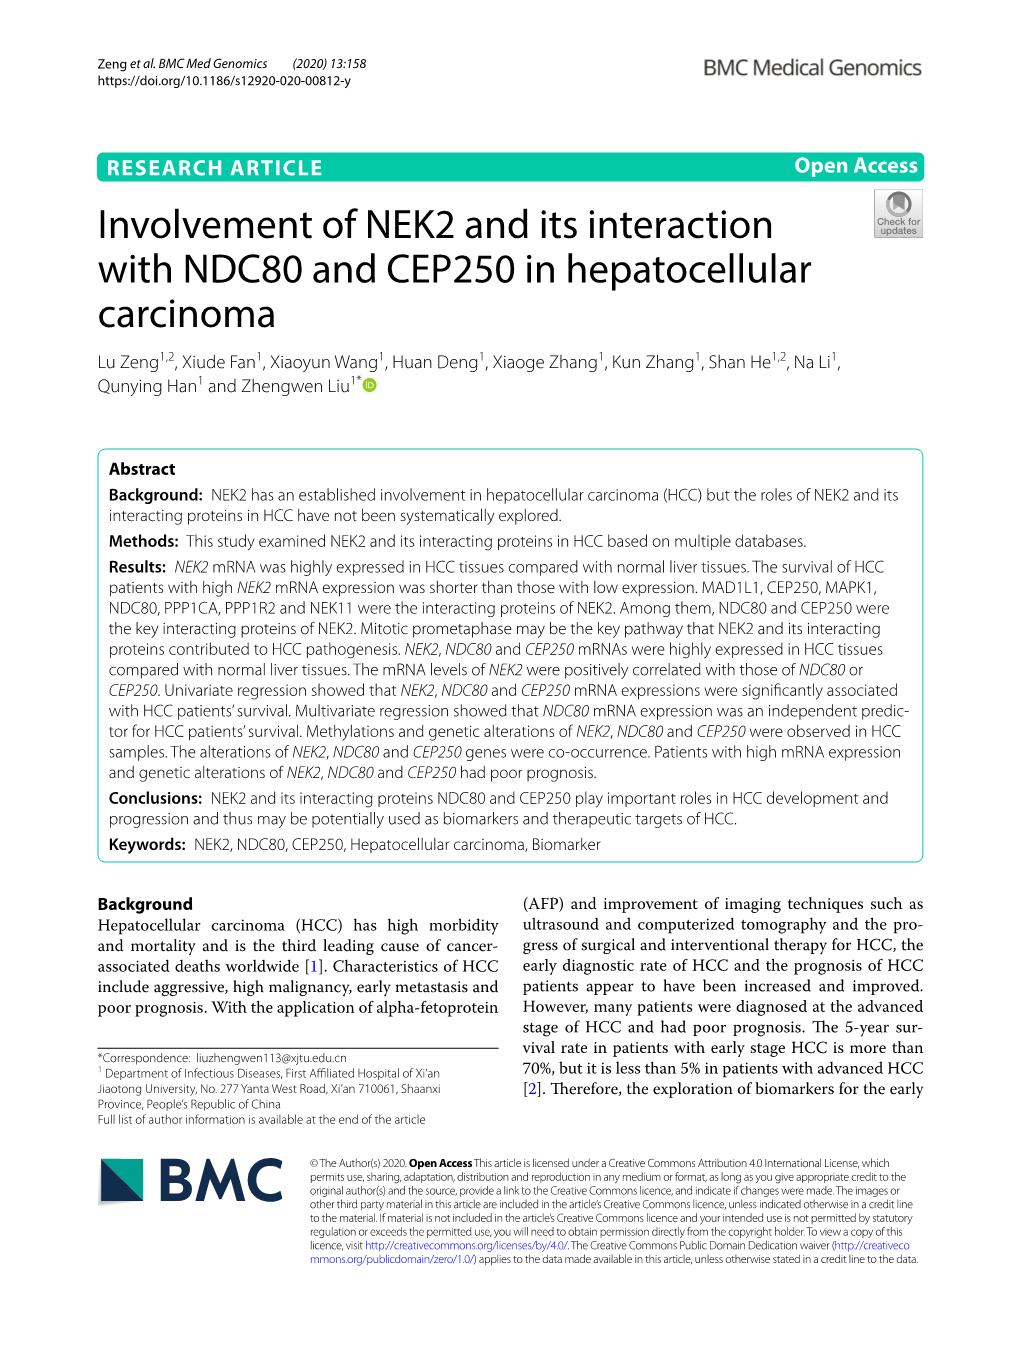 Involvement of NEK2 and Its Interaction with NDC80 and CEP250 in Hepatocellular Carcinoma